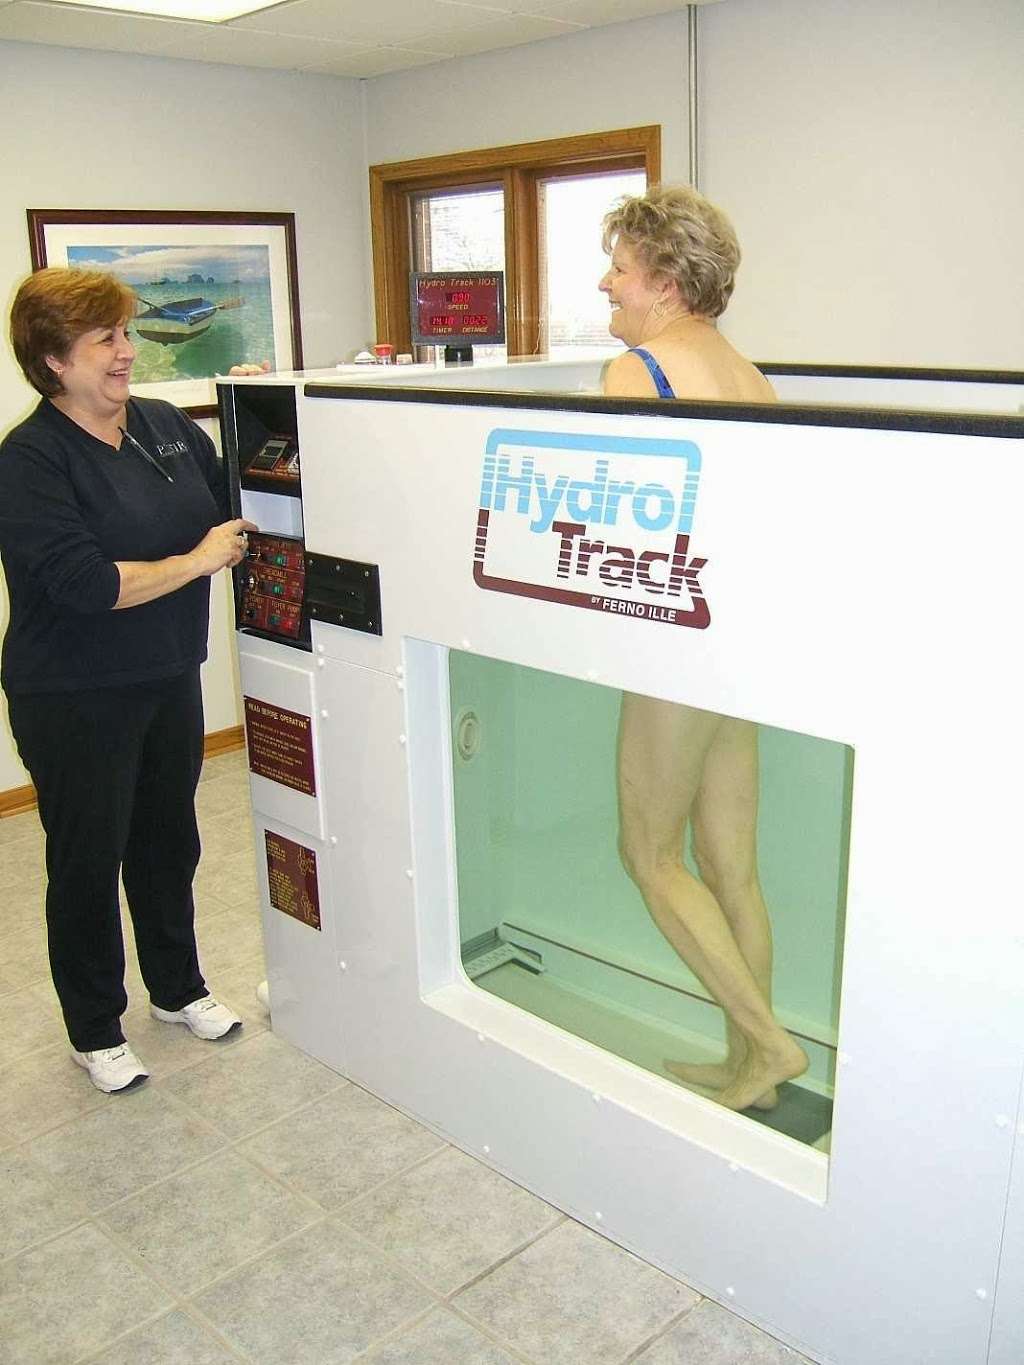 Ptsir-Physical Therapy | 17236 S Harlem Ave, Tinley Park, IL 60477 | Phone: (708) 633-8379